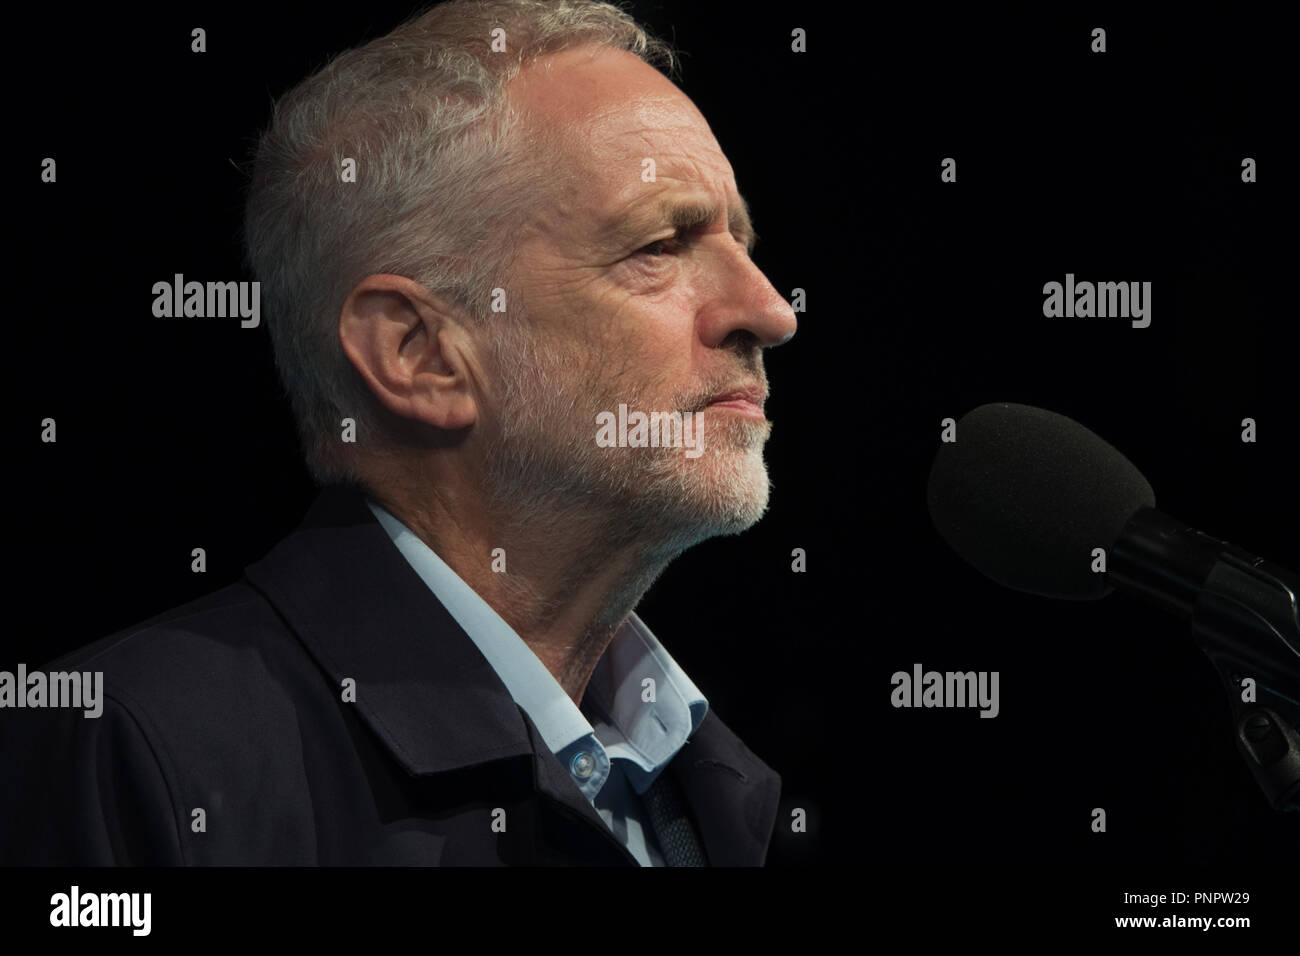 Liverpool, UK. 22nd September 2018. Labour Leader Jeremy Corbyn gives a rousing speech to huge crowds at the Pier Head rally ahead of the Labour Party Conference. Credit: Ken Biggs/Alamy Live News. Stock Photo